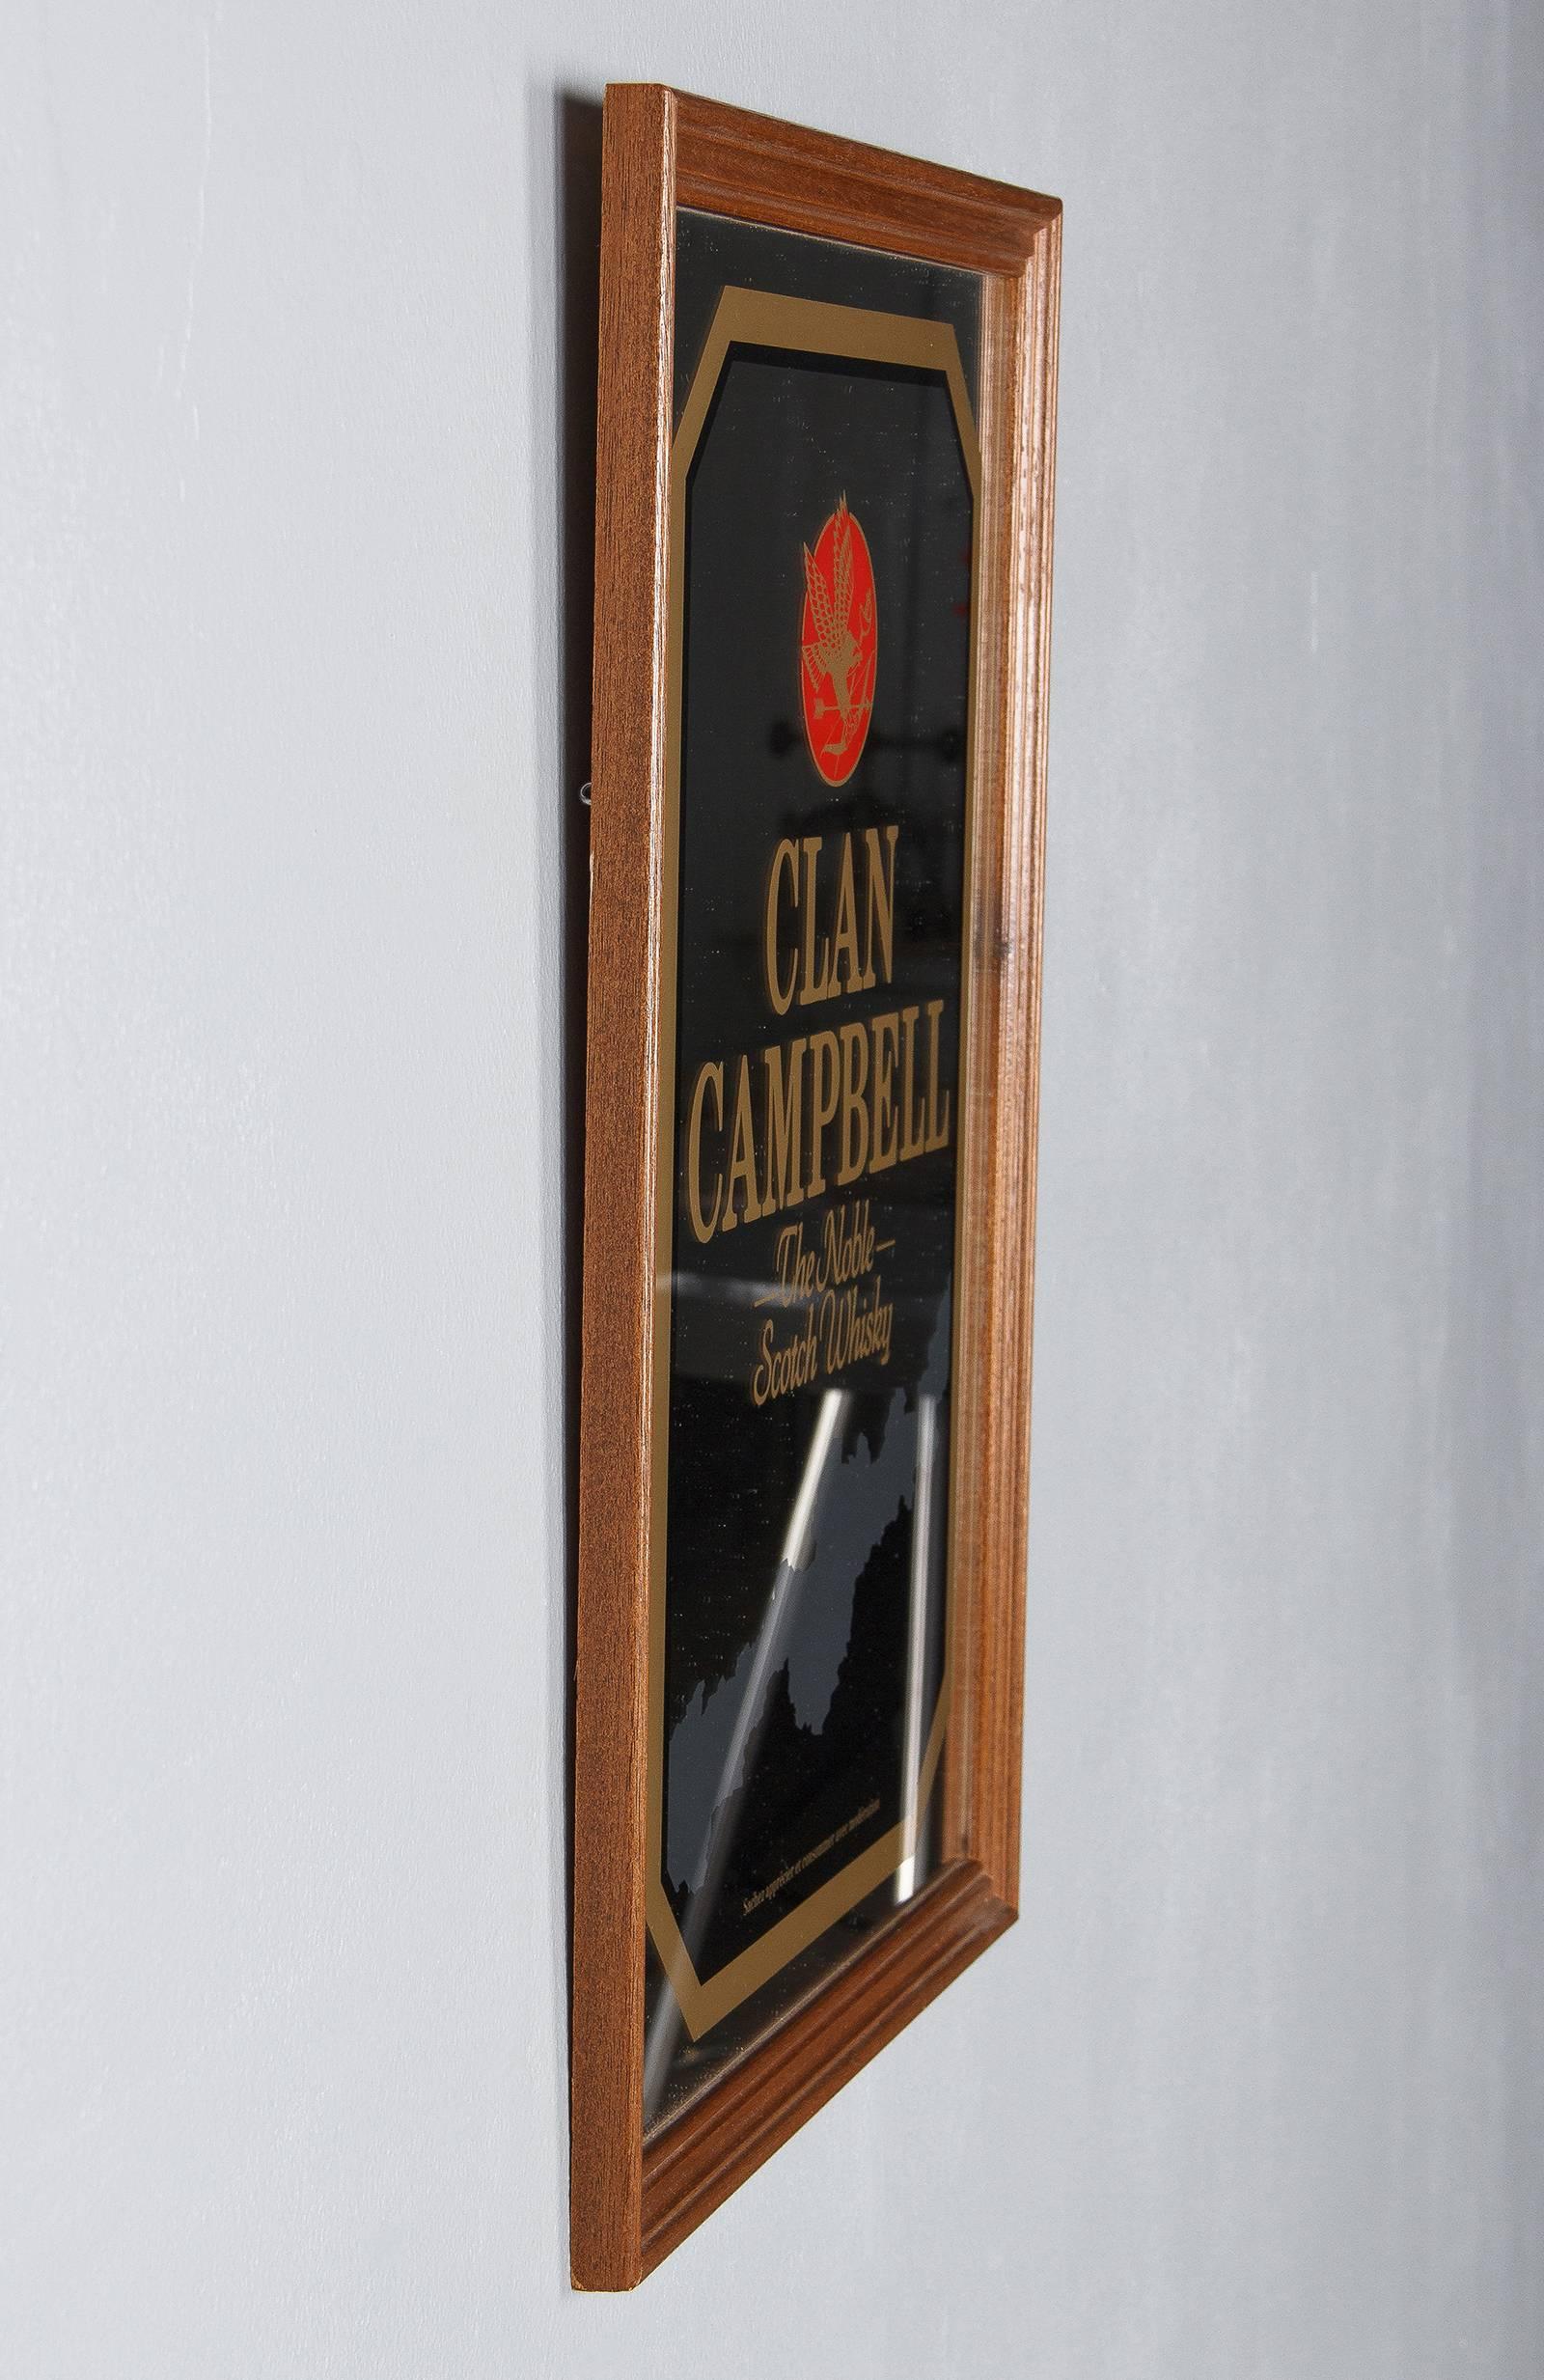 Modern Vintage Frame with Mirrored Advertising Sign for Clan Campbell Scotch, 1980s